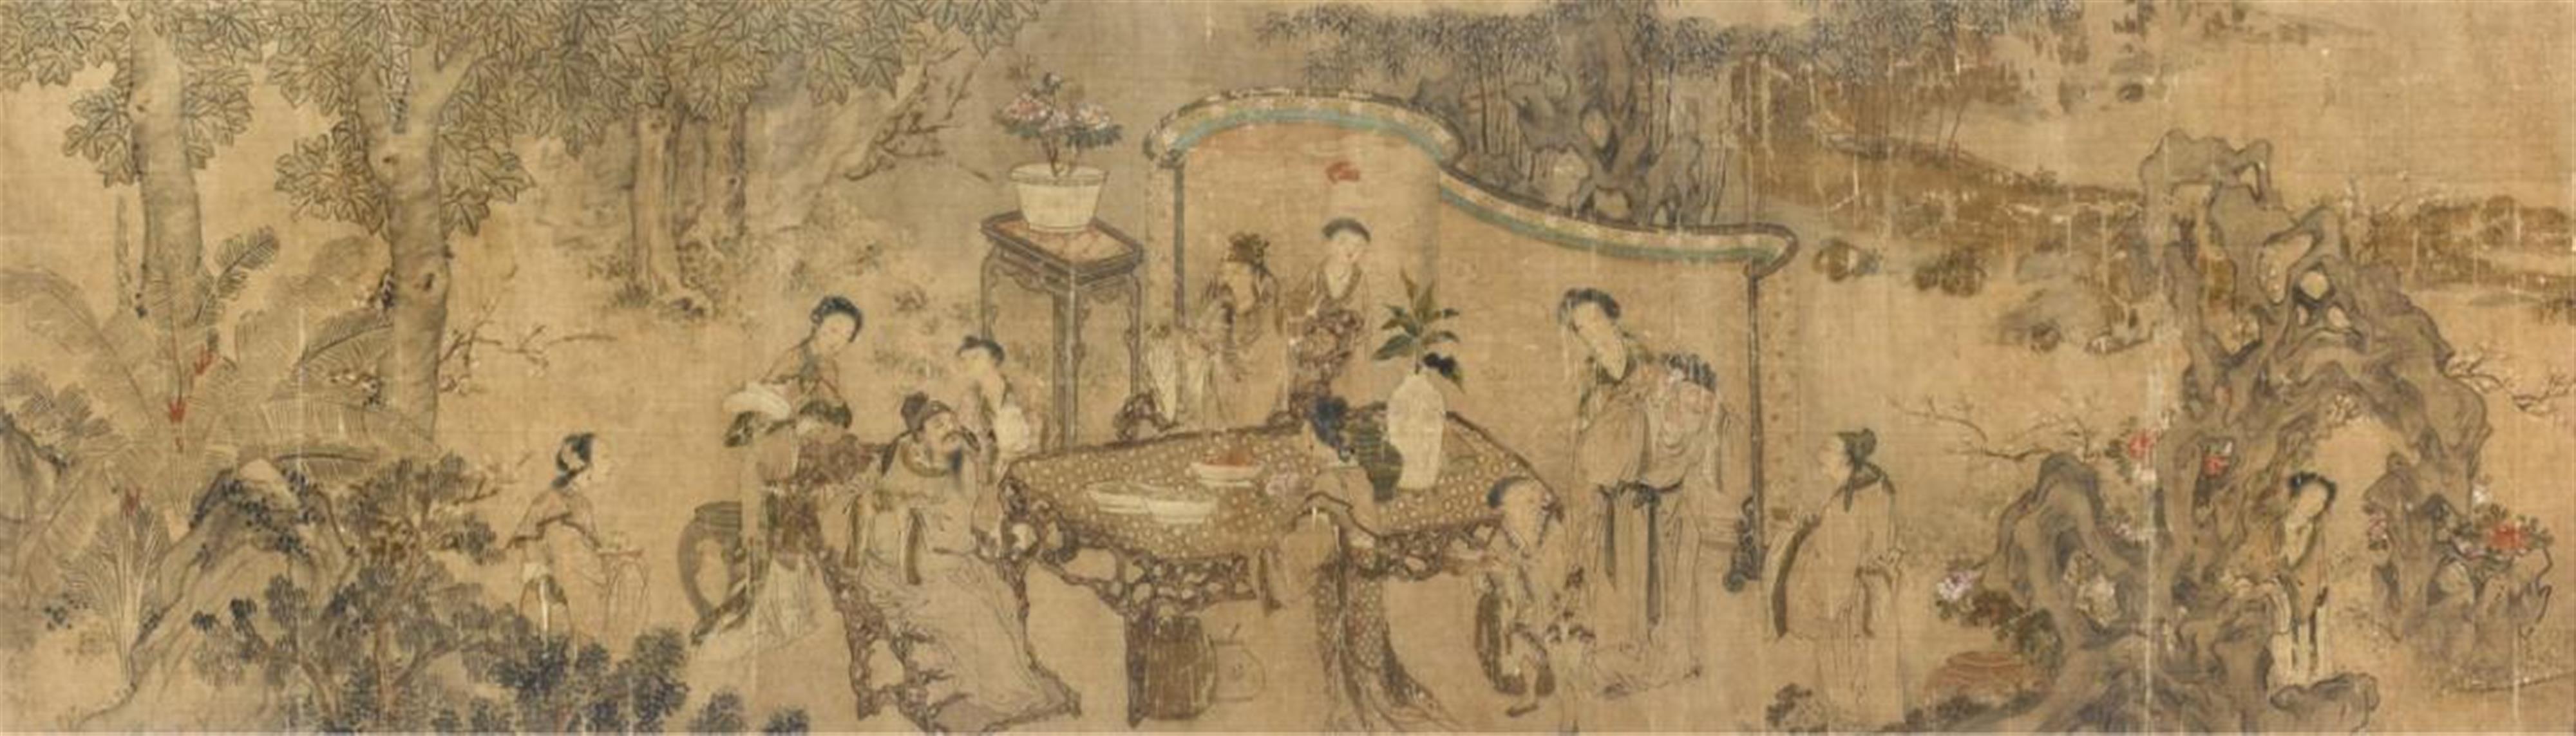 Unknown Artist . 17th/18th century - Scholars and palace ladies with servants in a garden landscape. Section from an horizontal scroll. Ink and colours on silk. 17th/18th century. - image-1